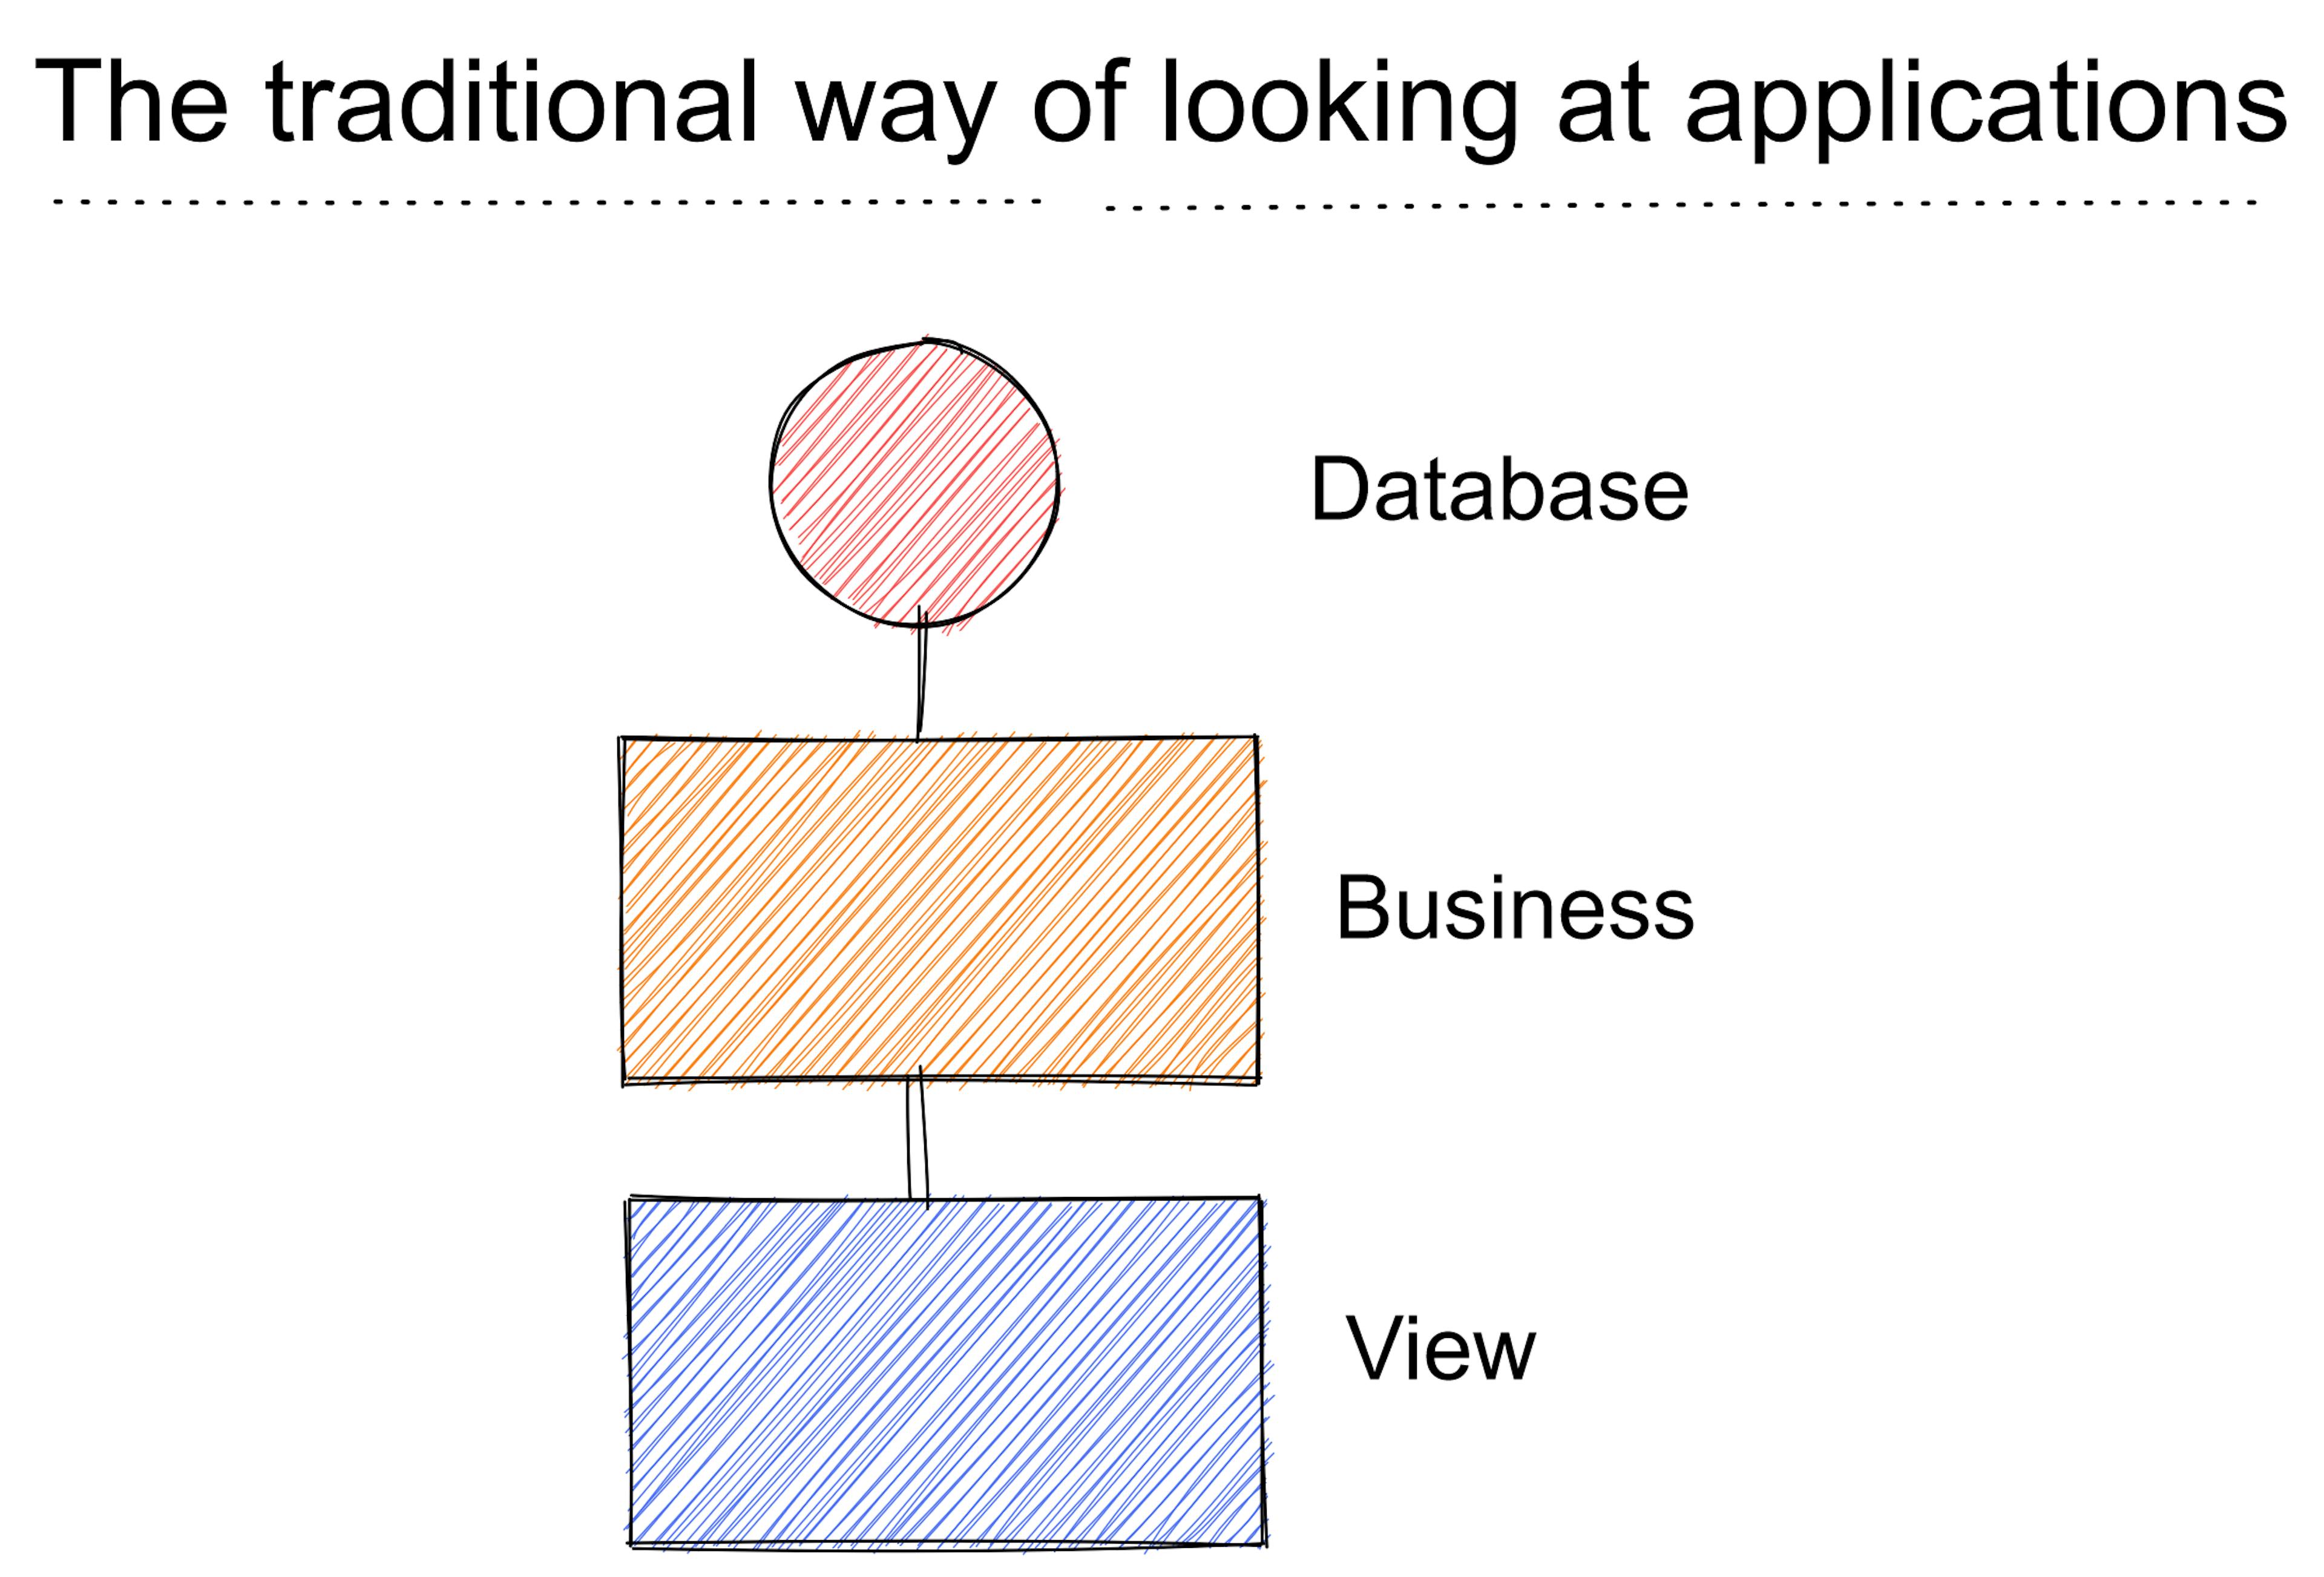 The traditional 3-layered application. After your application grows to a certain extent, this doesn't work anymore